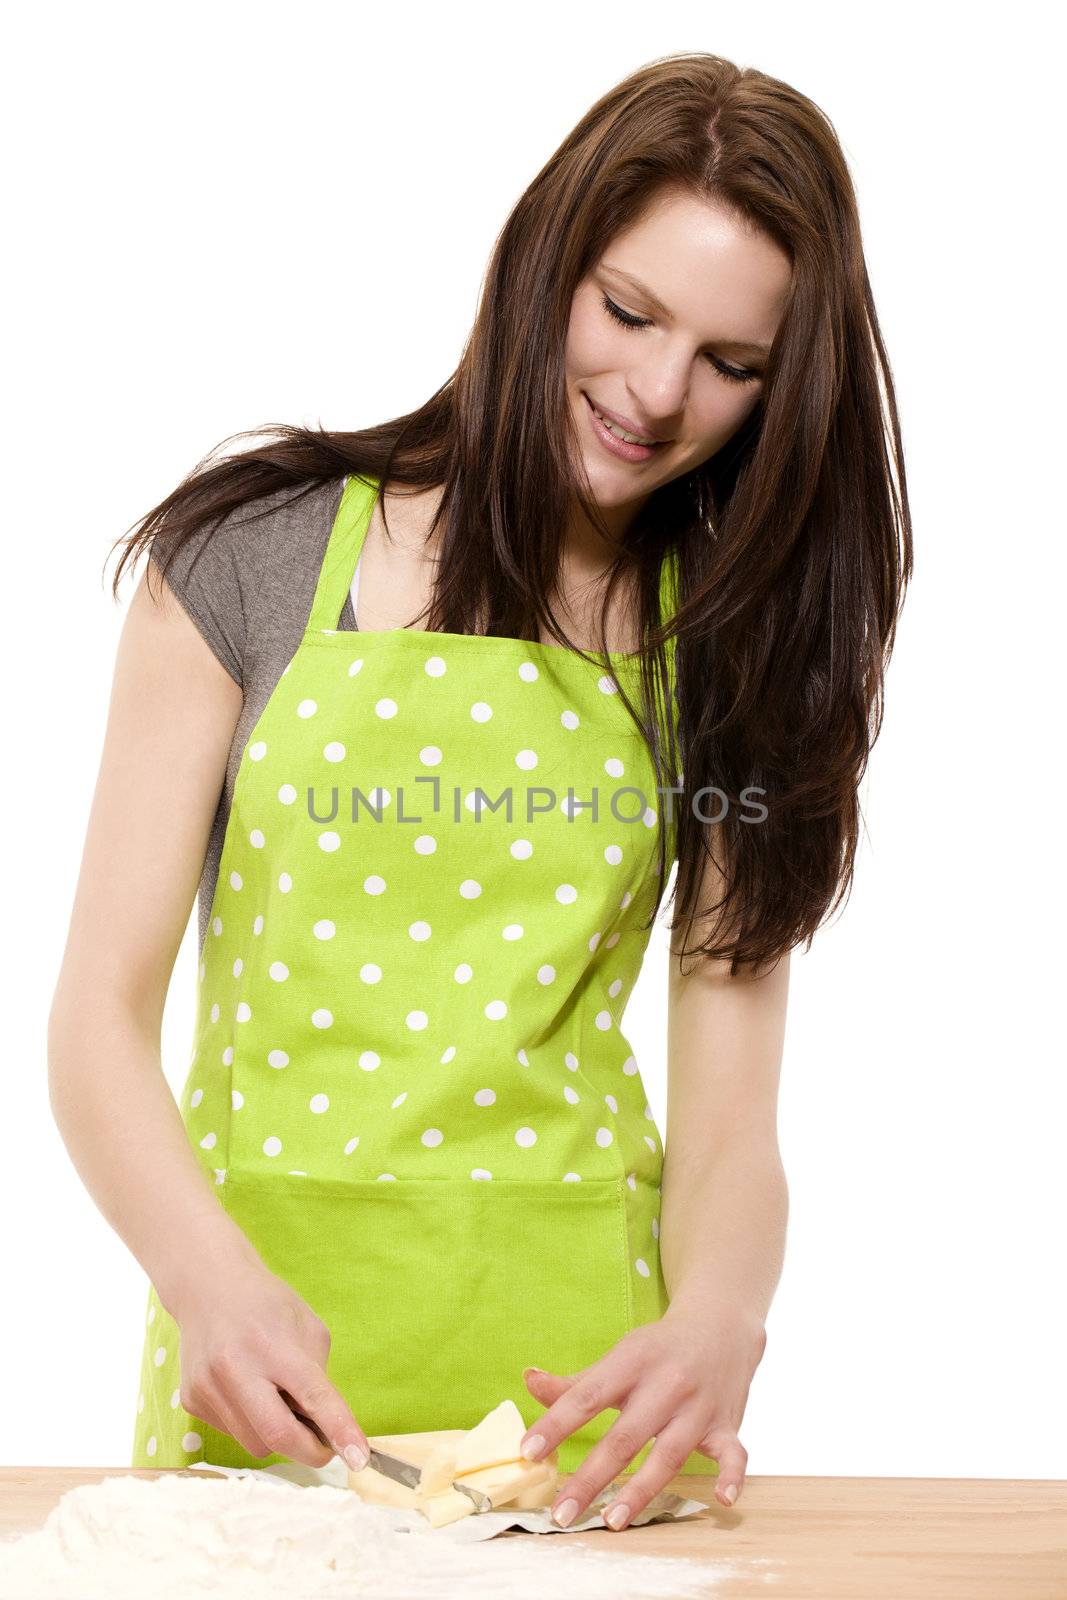 young smiling woman cutting butter or shortening for baking on white background